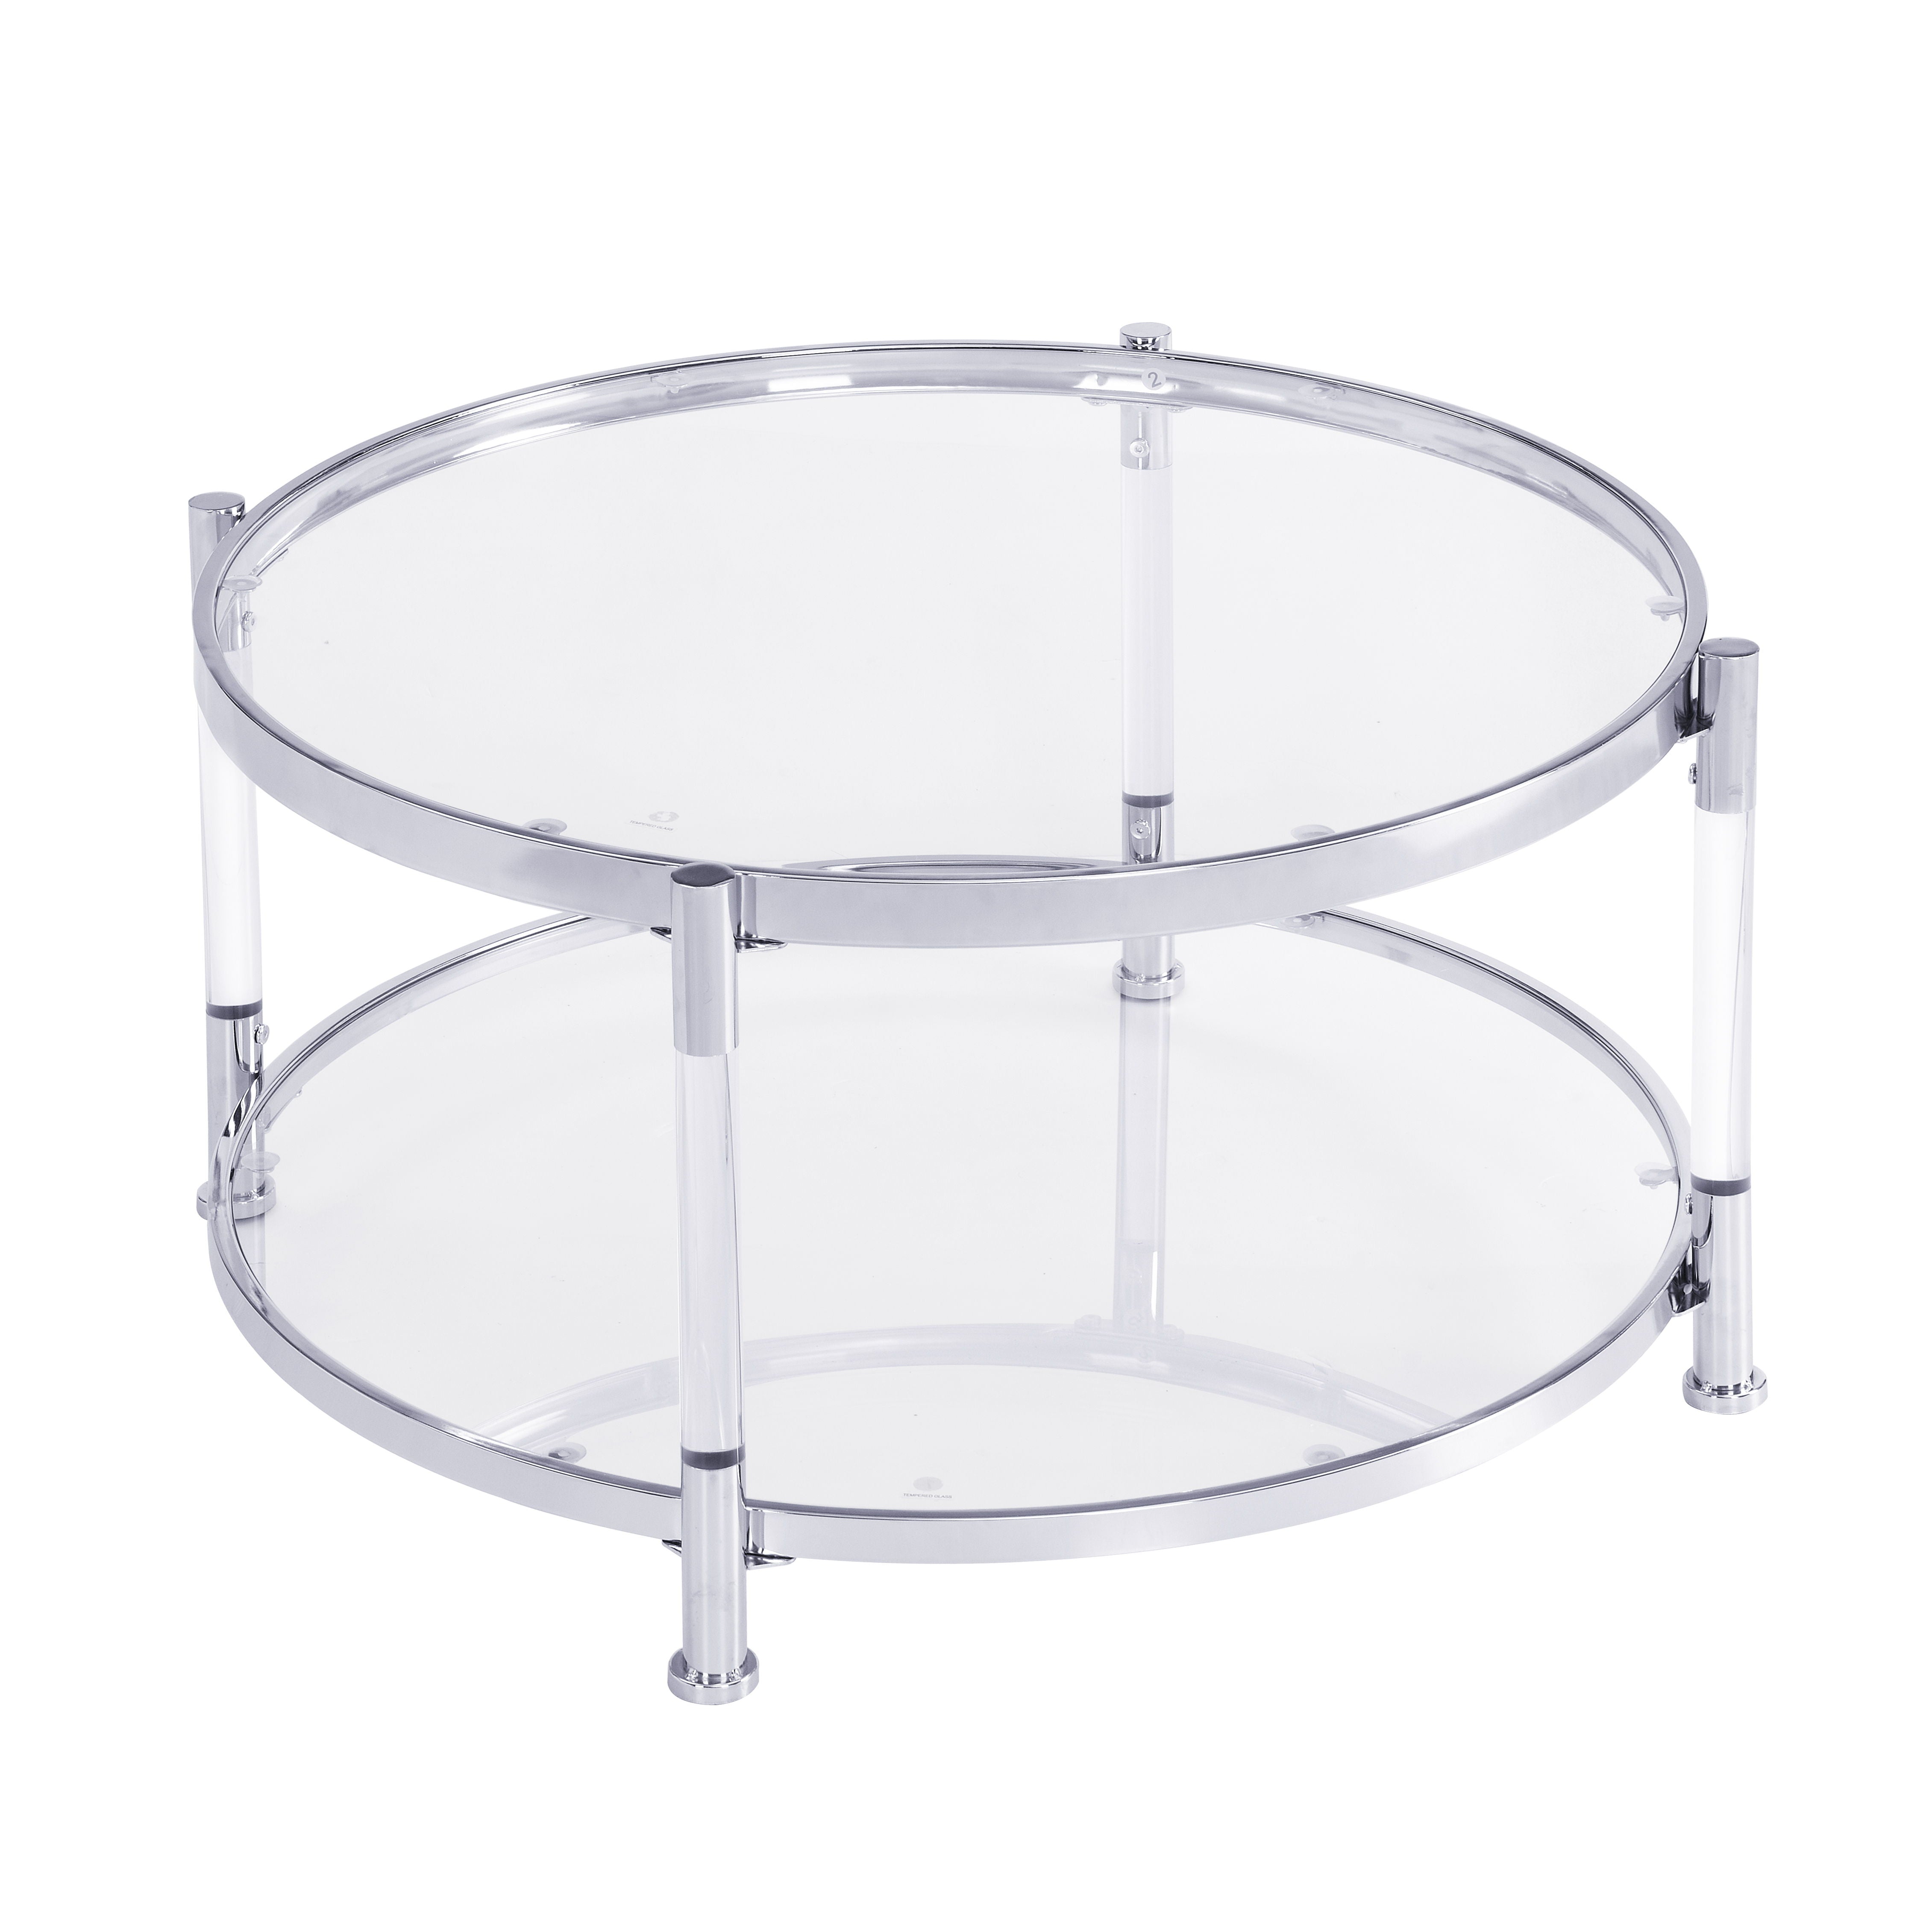 W82153572 Contemporary Acrylic Coffee Table, 32.3'' Round Tempered Glass Coffee Table, Chrome/Silver Coffee Table For Living Room